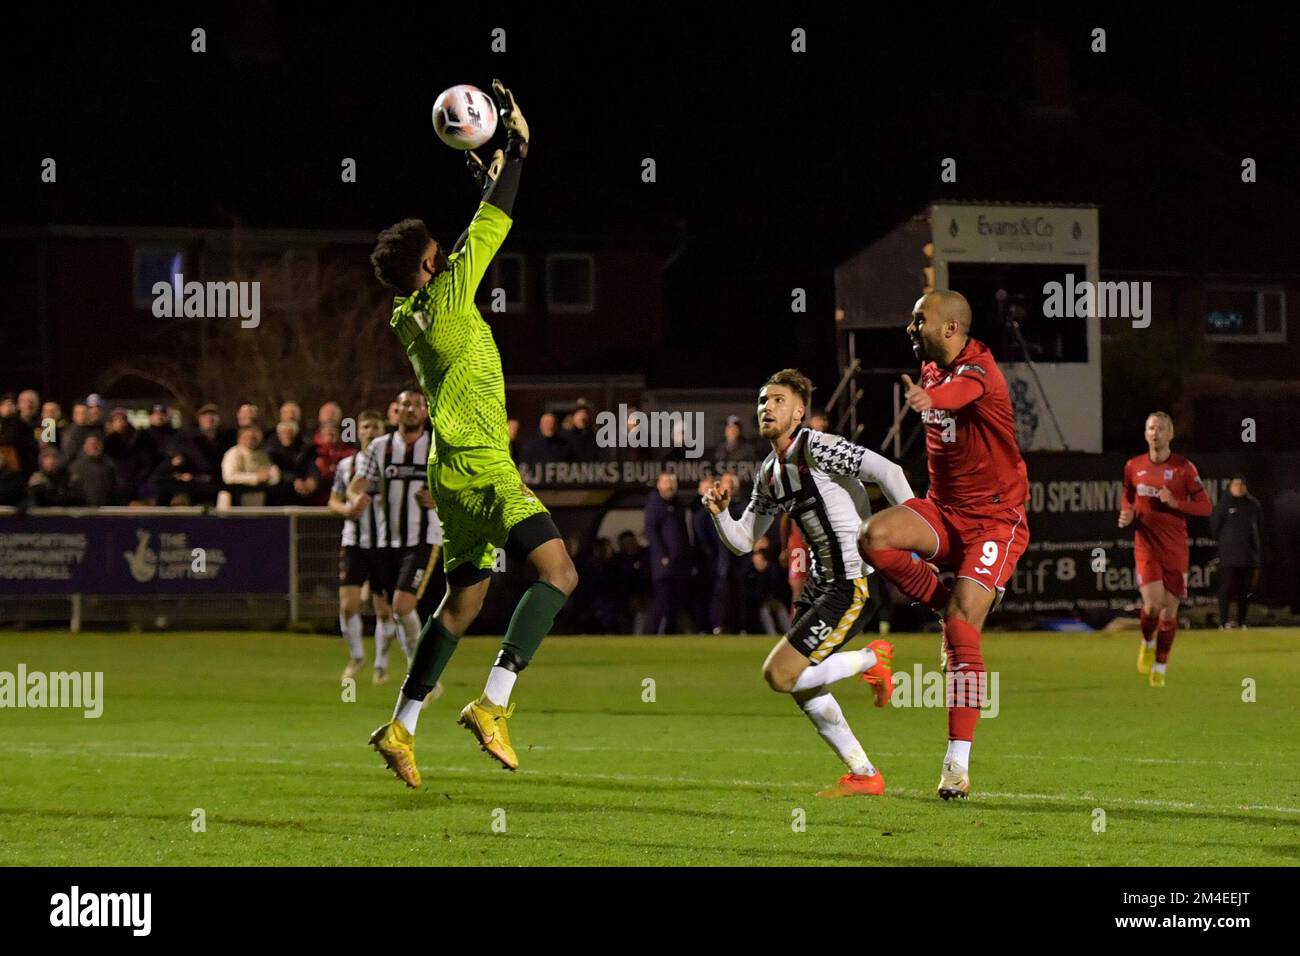 Darlington's Jacob Hazel lobs the ball over Spennymoor Town's Gio Bellagambi only for Spennymoor Town's Finn Cousin Dawson to clear the ball off the line during The Isuzu FA Trophy match between Spennymoor Town and Darlington at the Brewery Field, Spennymoor on Tuesday 20th December 2022. (Credit: Scott Llewellyn | MI News) Credit: MI News & Sport /Alamy Live News Stock Photo